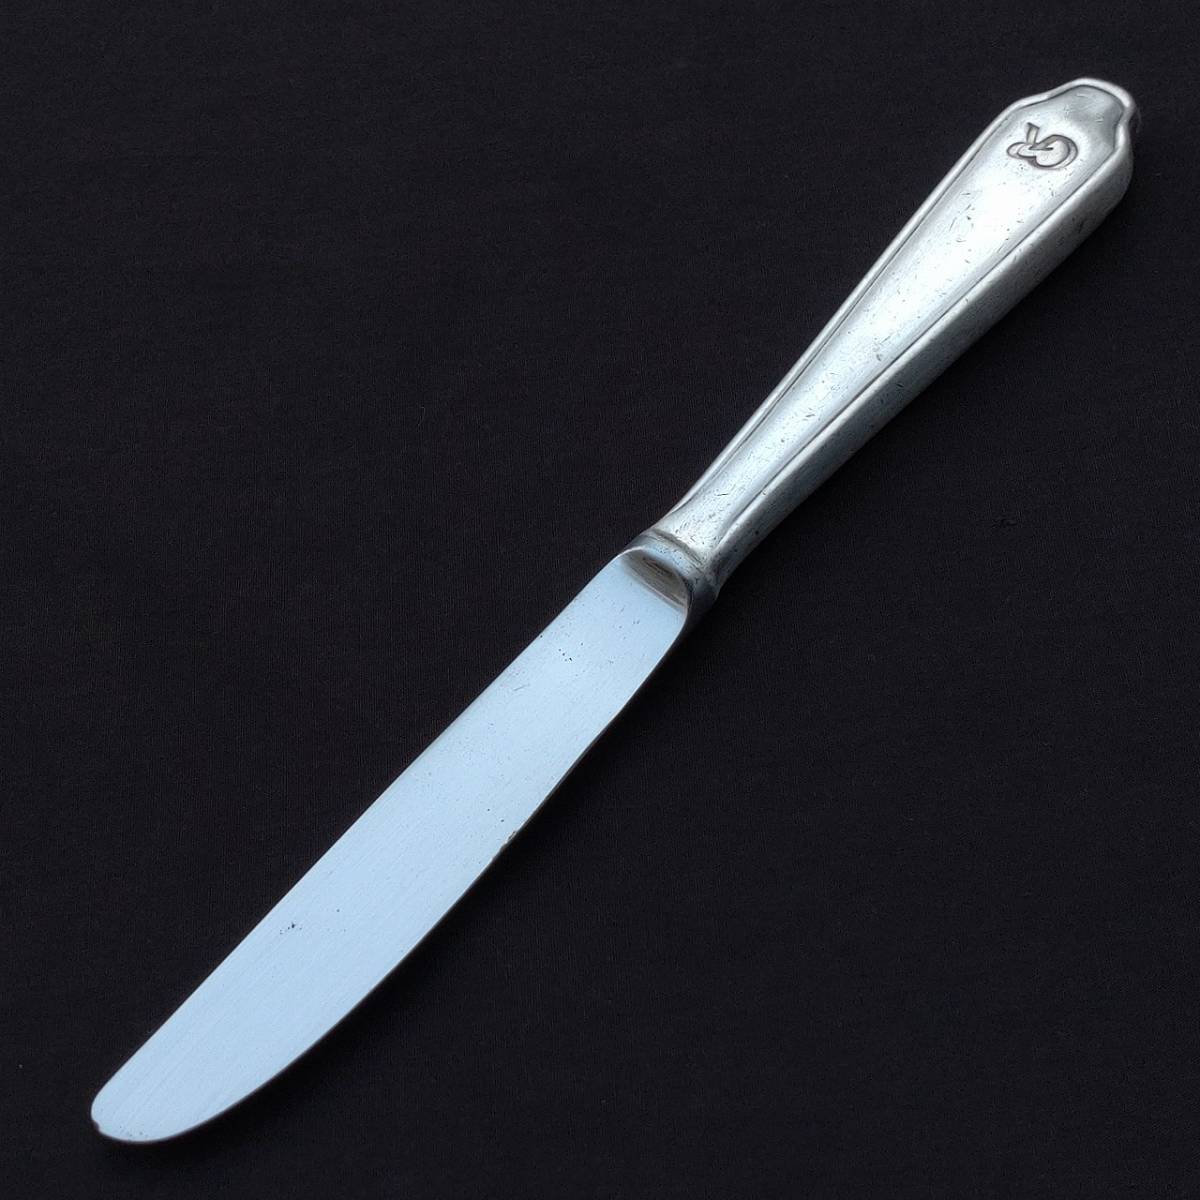  table knife steak knife GAUFRES RITZ N.S. Martian \'89 blade length approximately 105. total length approximately 220. cutlery [4645]